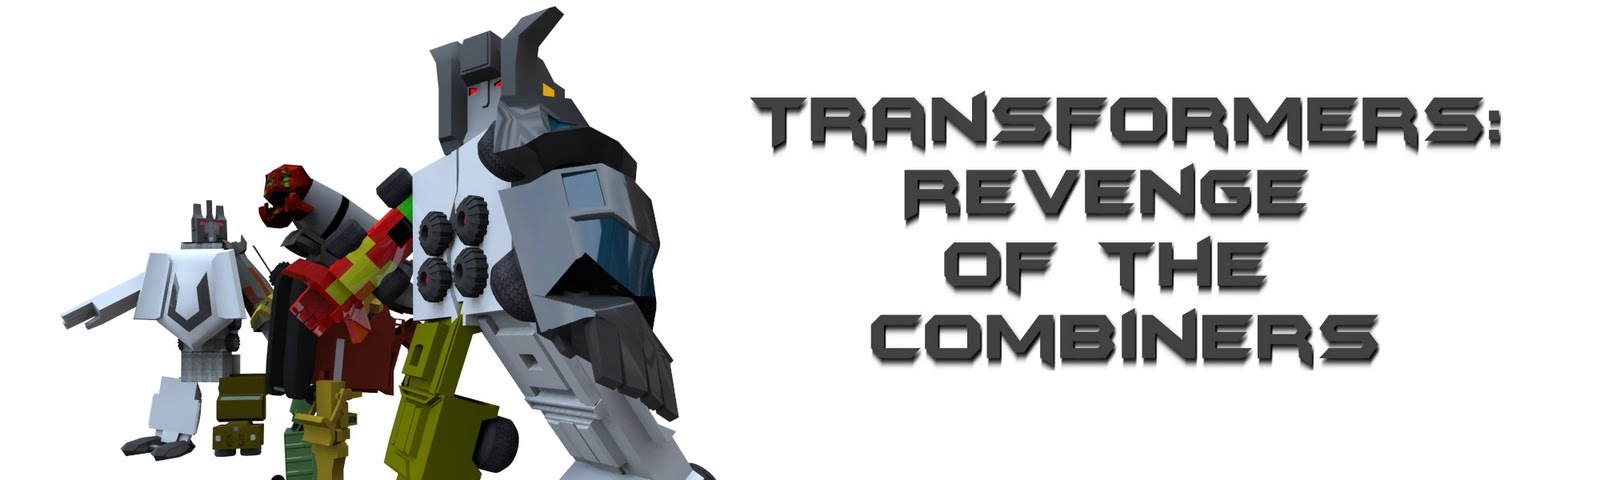 Transformers: Revenge of the Combiners